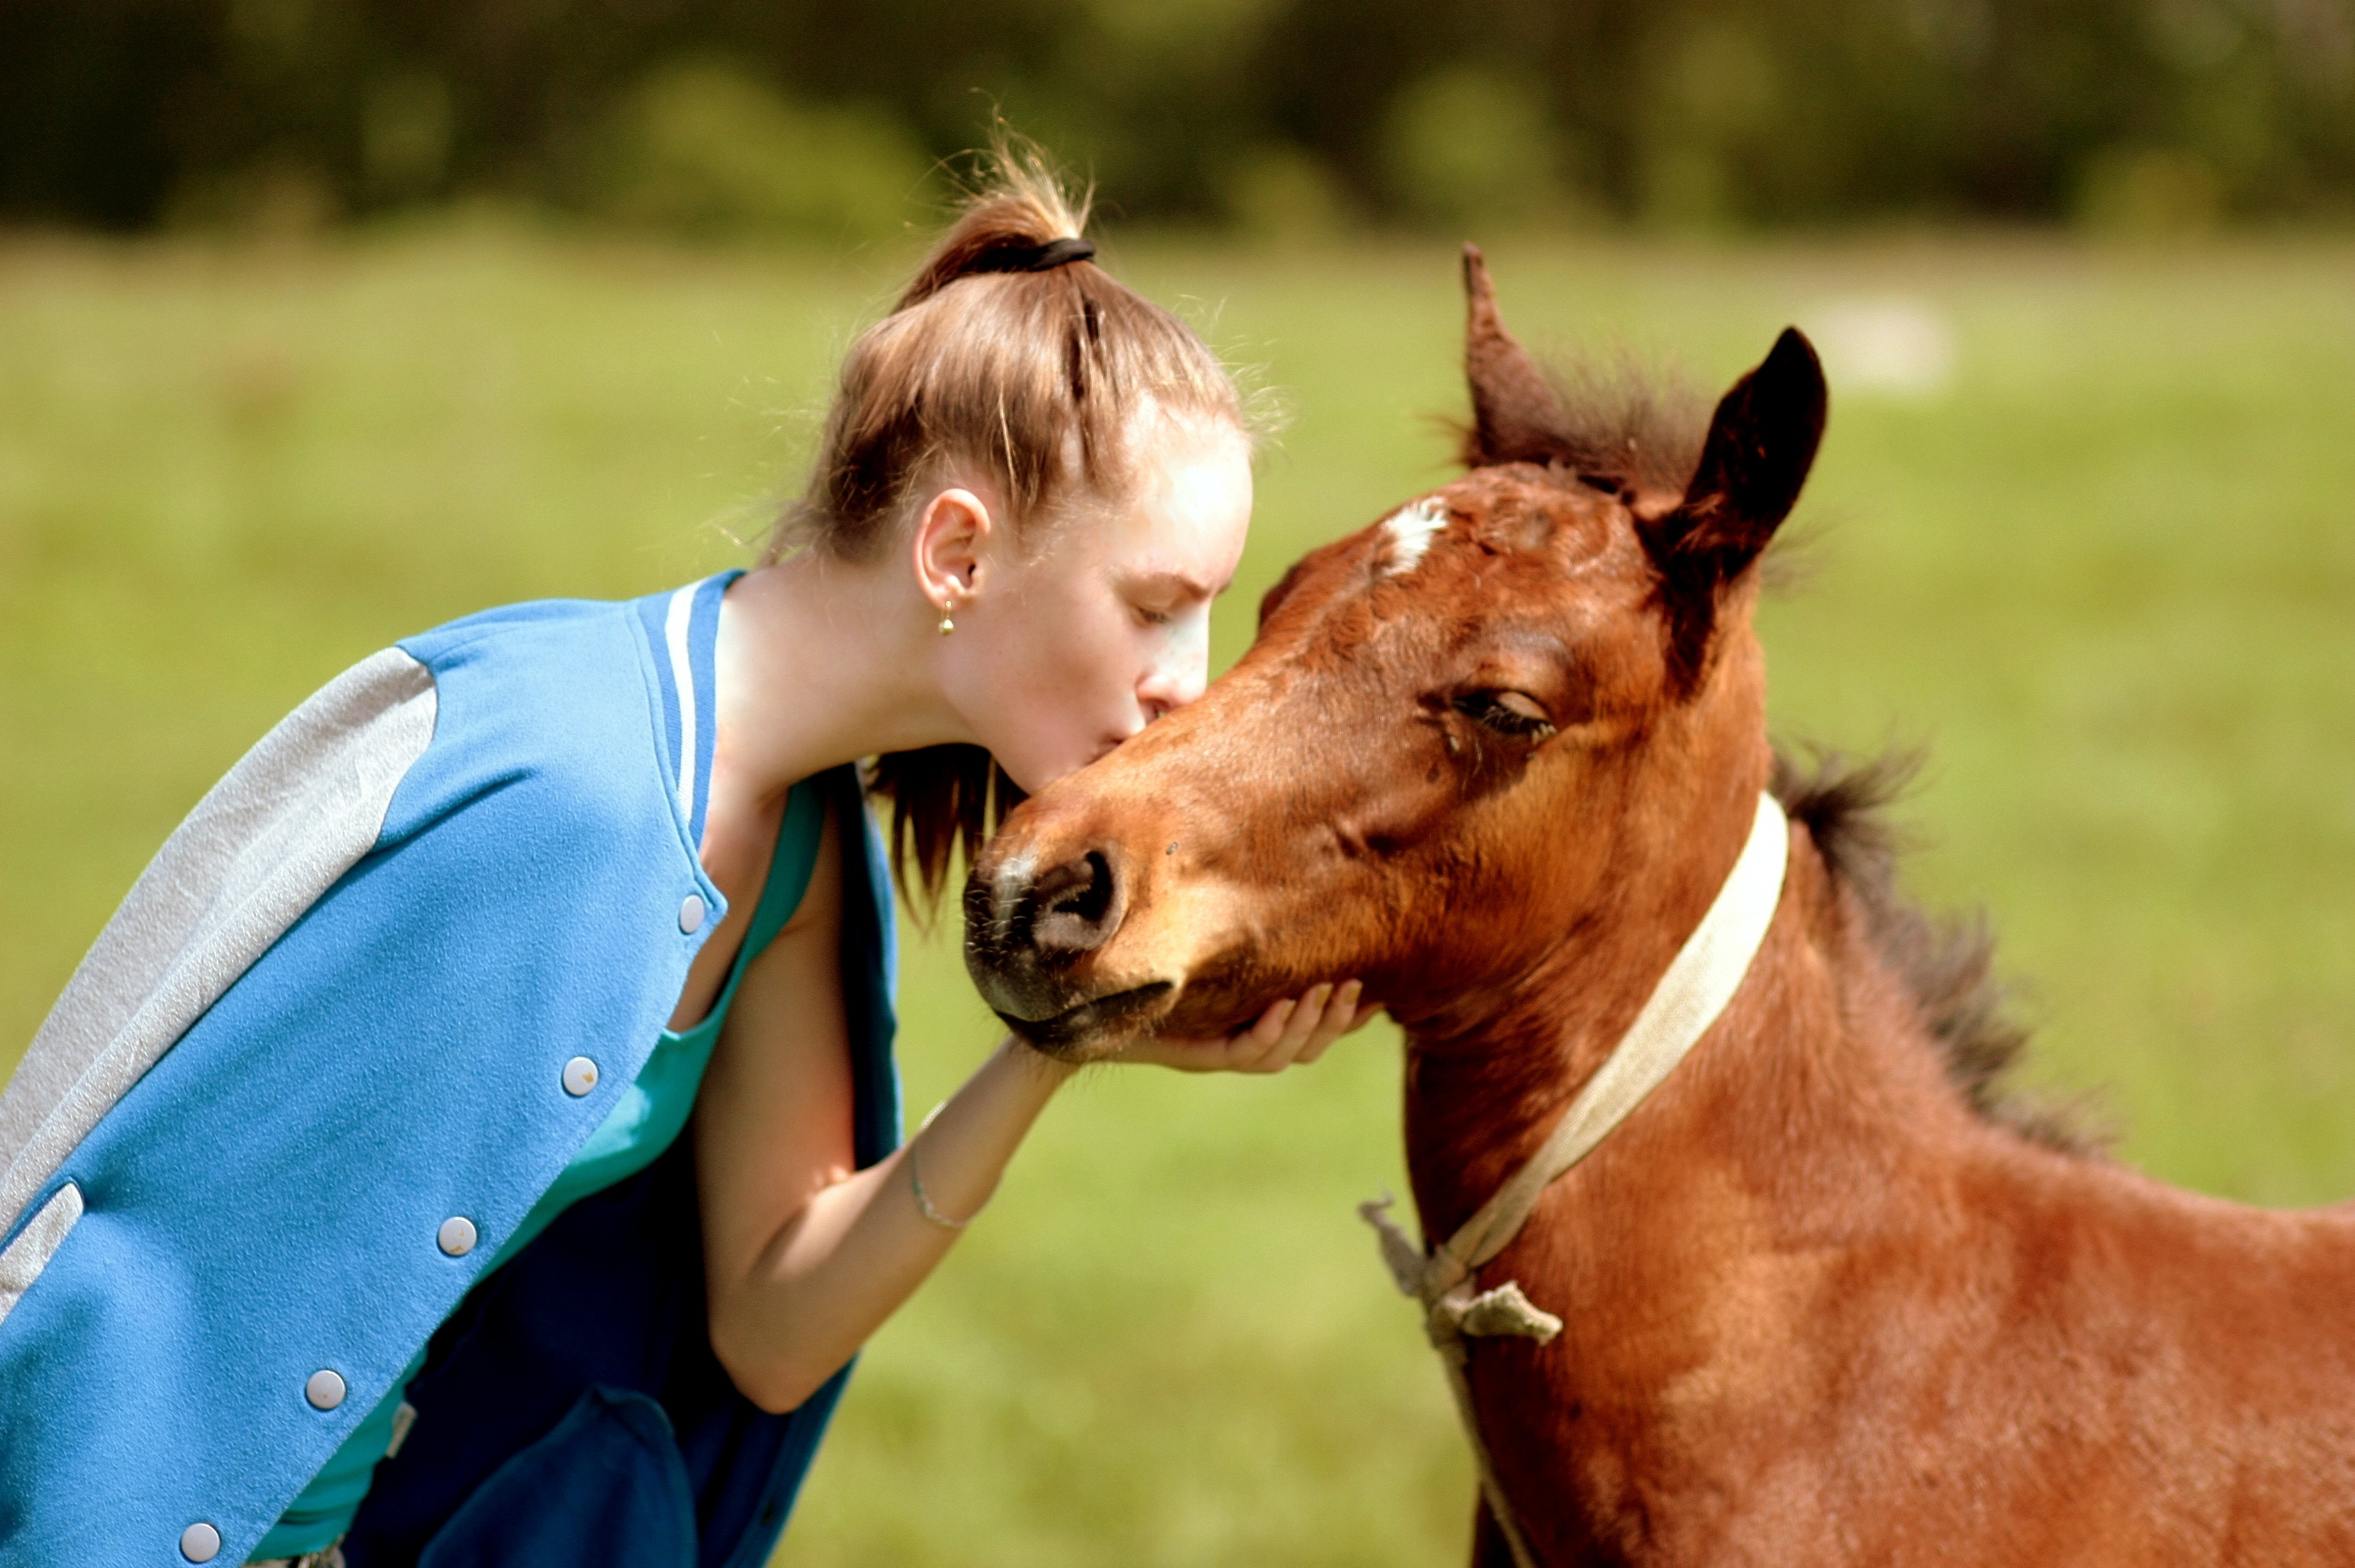 Have you imagined about checking in a hotel with your pet horse? here is the amazing story